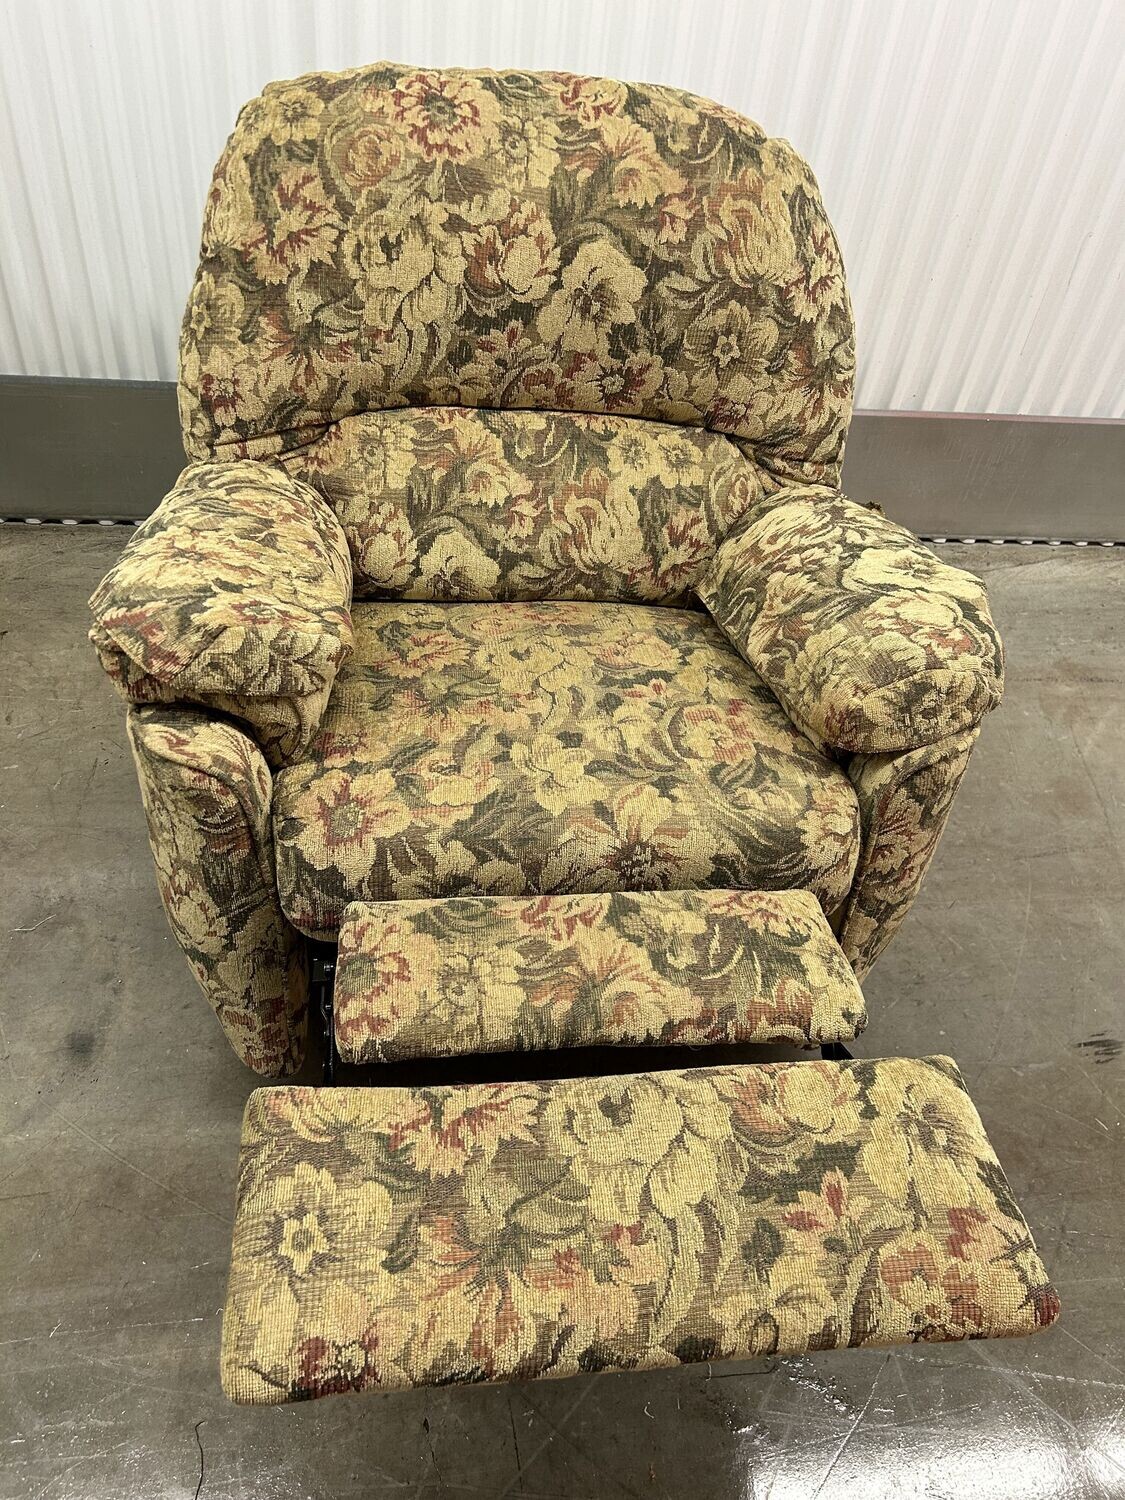 Rocker / Recliner with floral upholstery, great condition! #2213